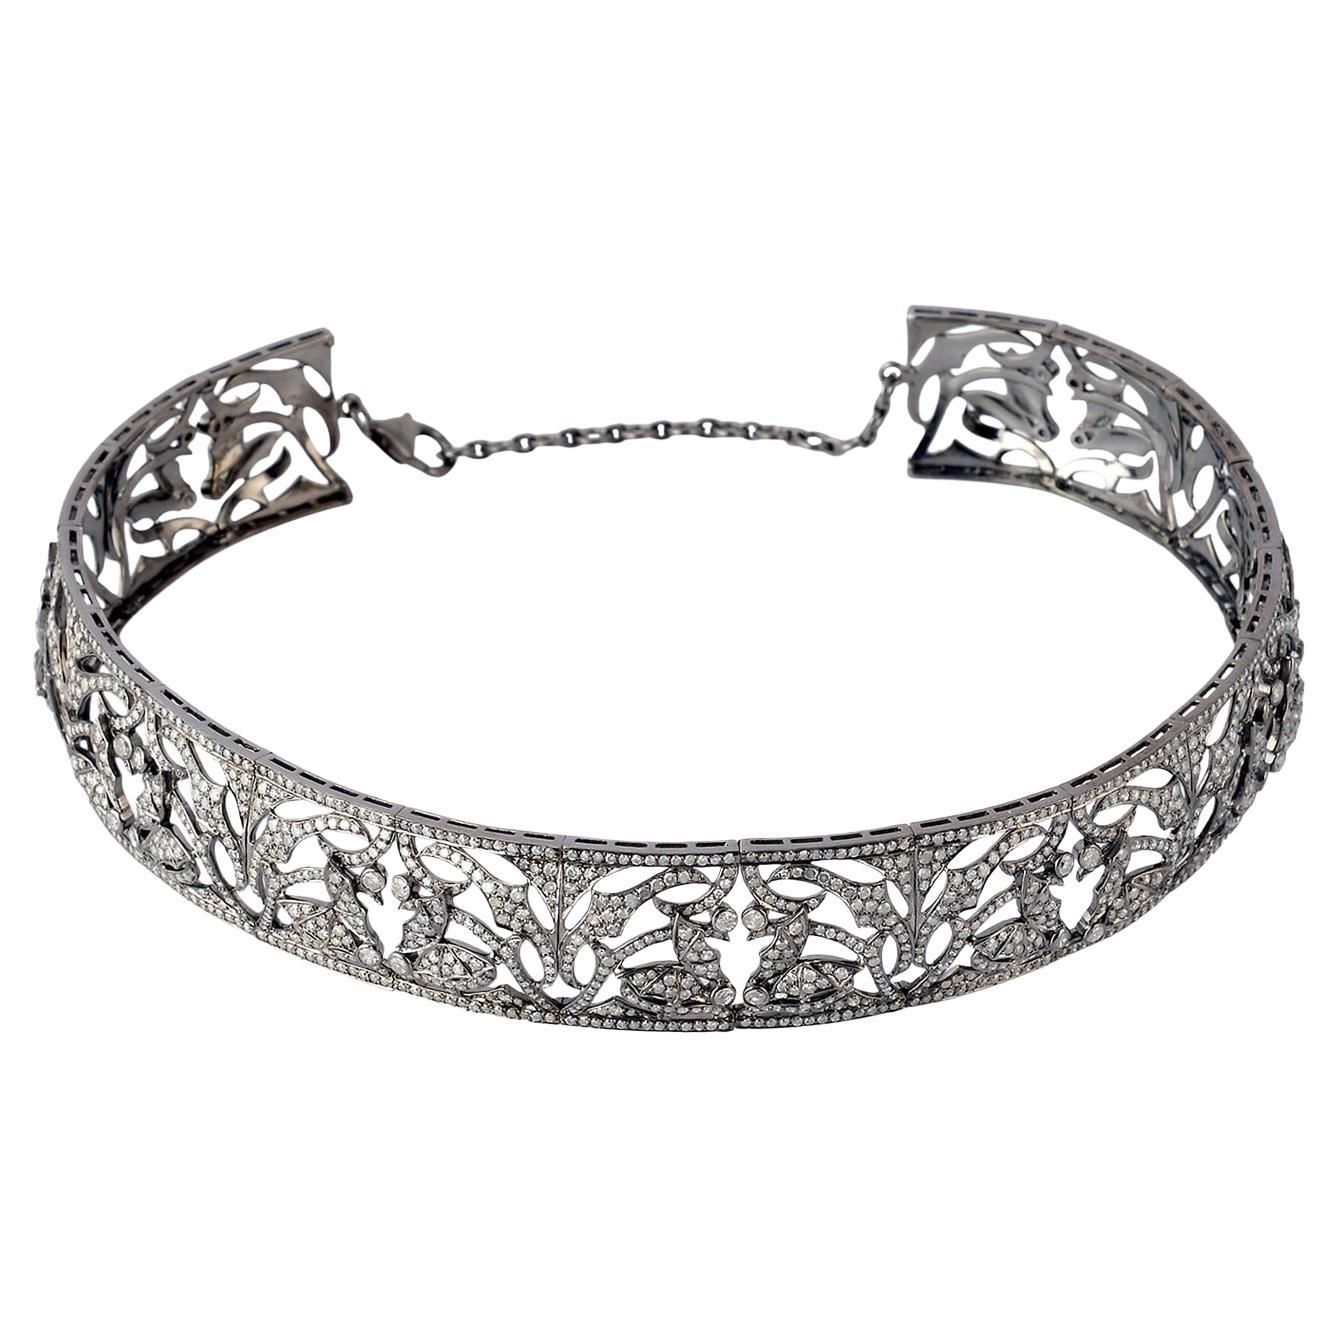 Flower Pattern Pave Diamond Choker Necklace Made in 18k White Gold & Silver